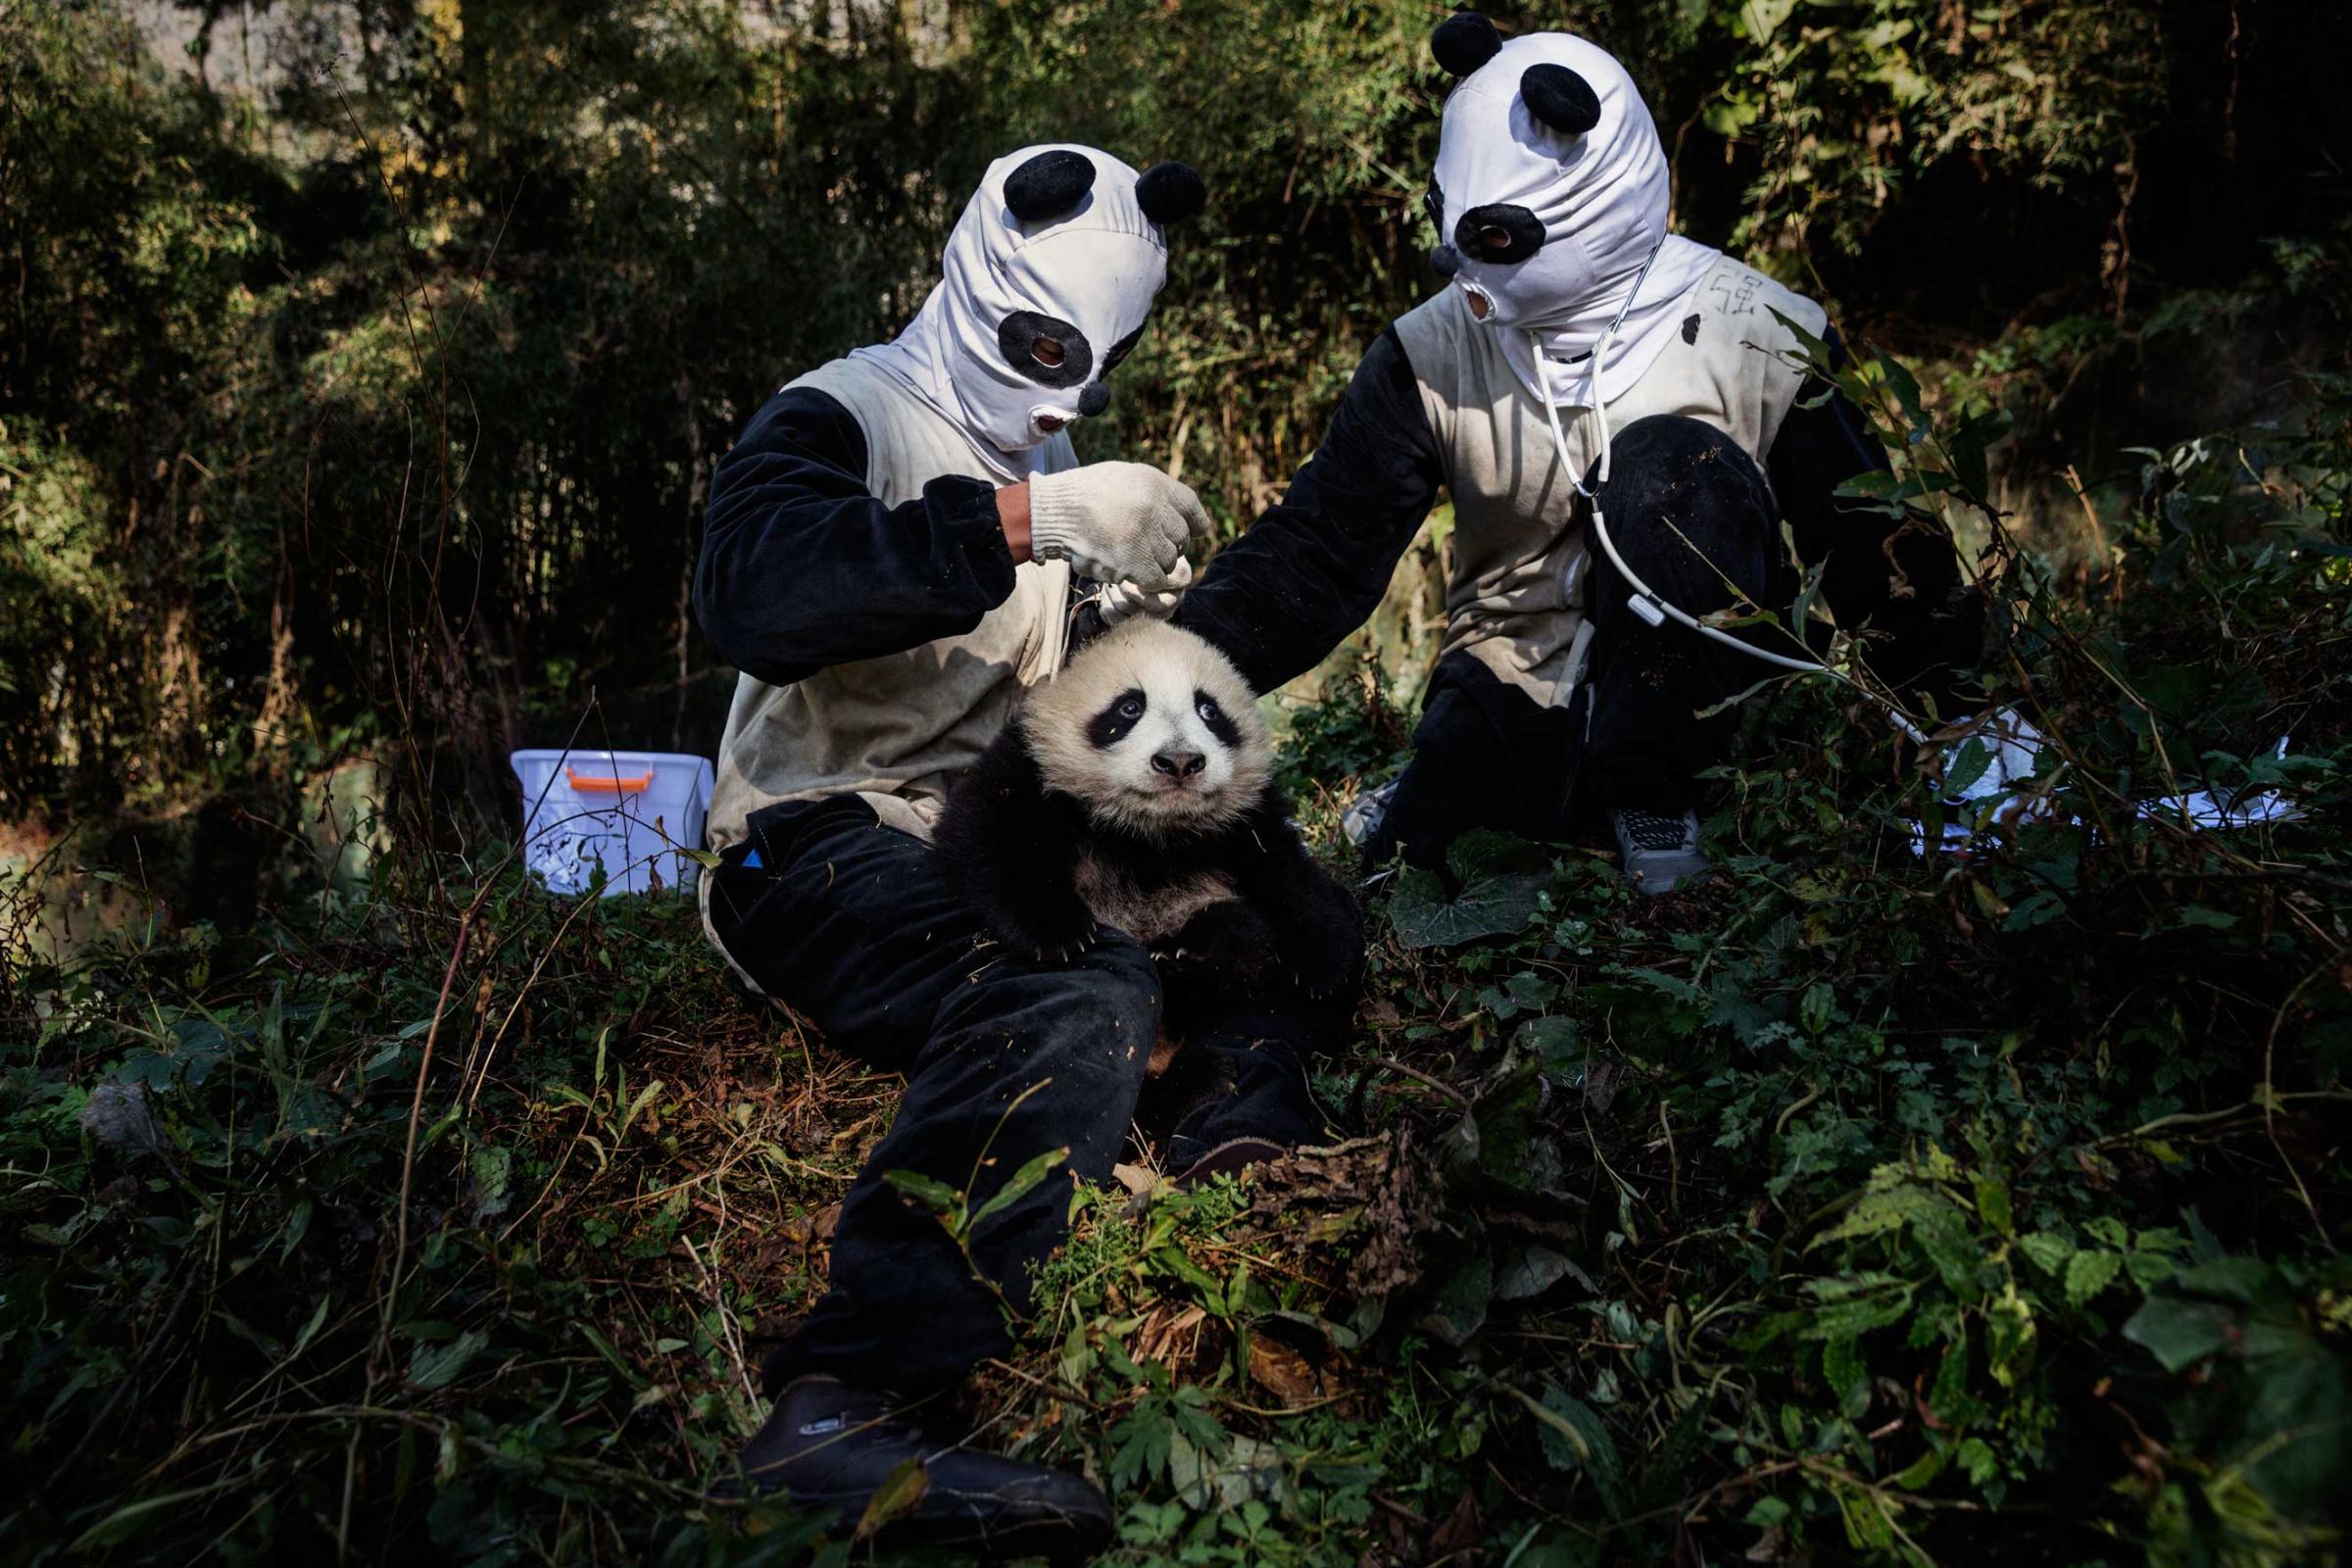 Researchers, dressed in panda costumes, check a 4 month old, female panda at the Hetaoping Research and Conservation Center, for the Giant Panda at the Wolong National Nature Reserve, Sichuan Province, China, Dec. 1, 2015.